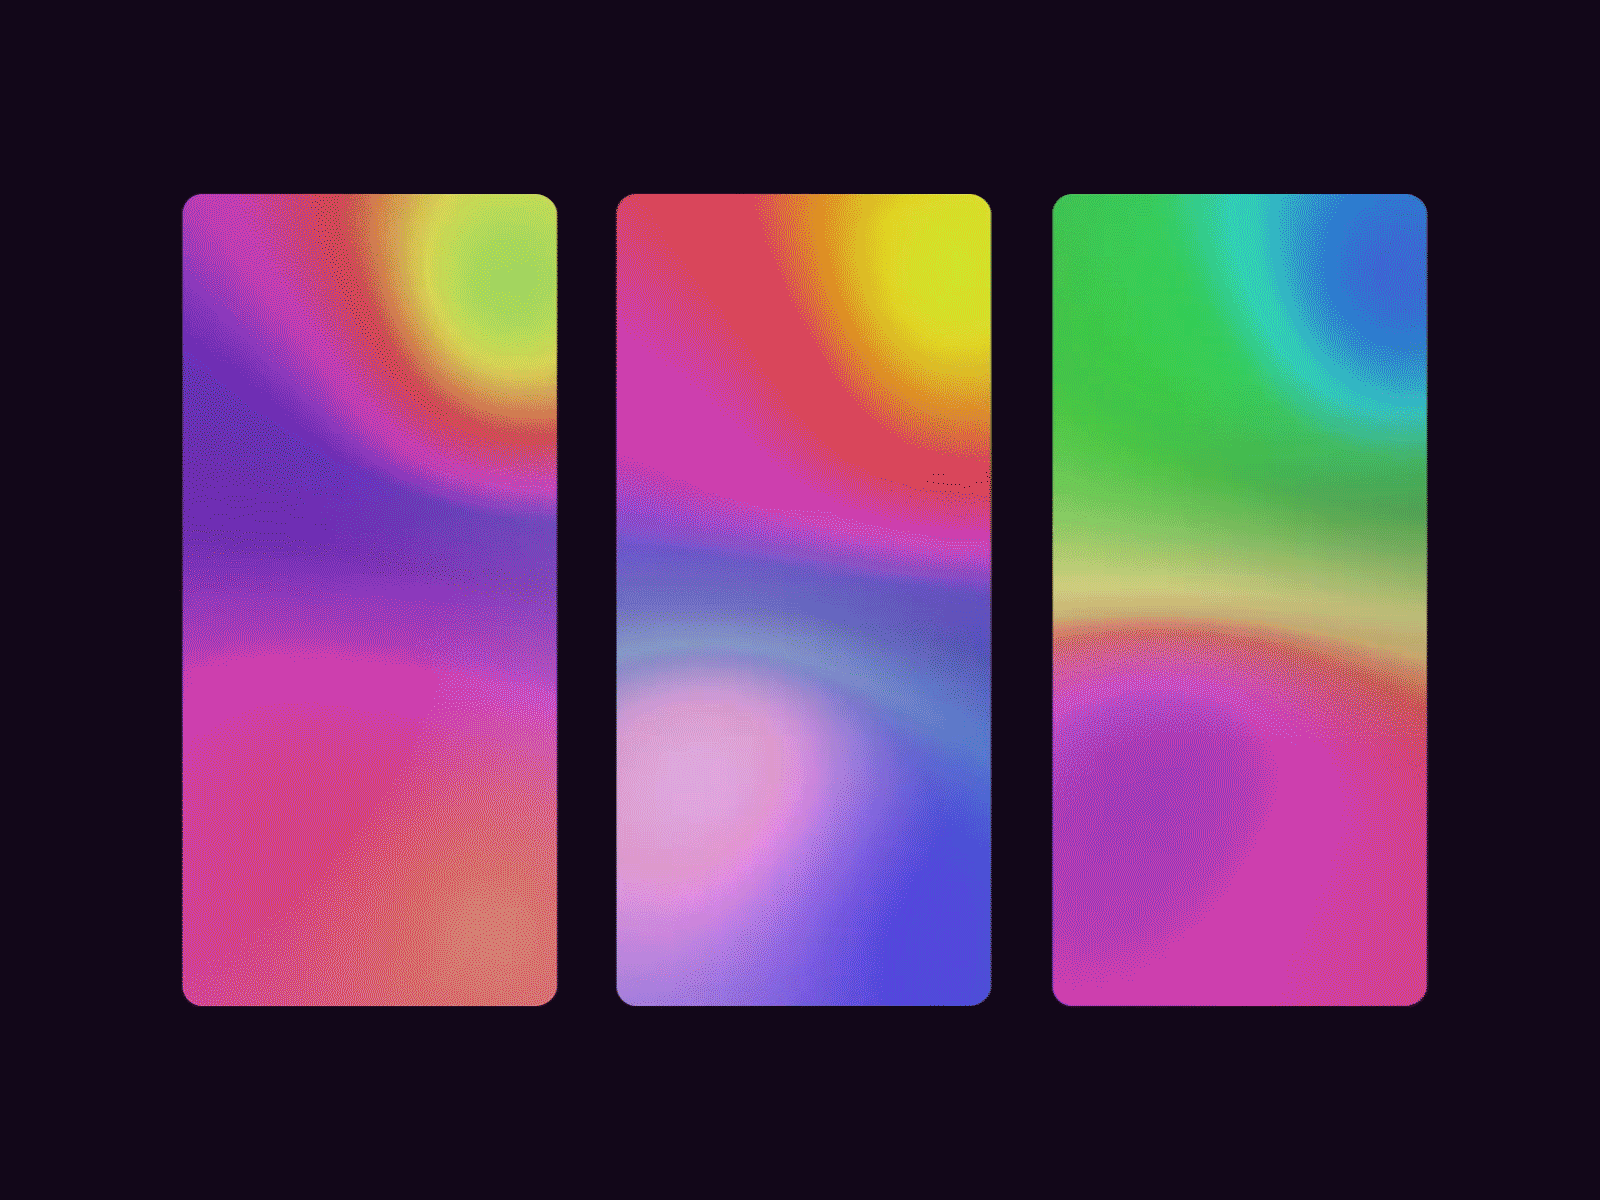 Magic | Daily UI Challenge 059 (Pattern Background) 059 59 background daily ui daily ui 059 dailyui dailyui 059 dailyui059 dailyuichallenge gradient movement neon pattern background psychedelic ui vibrant